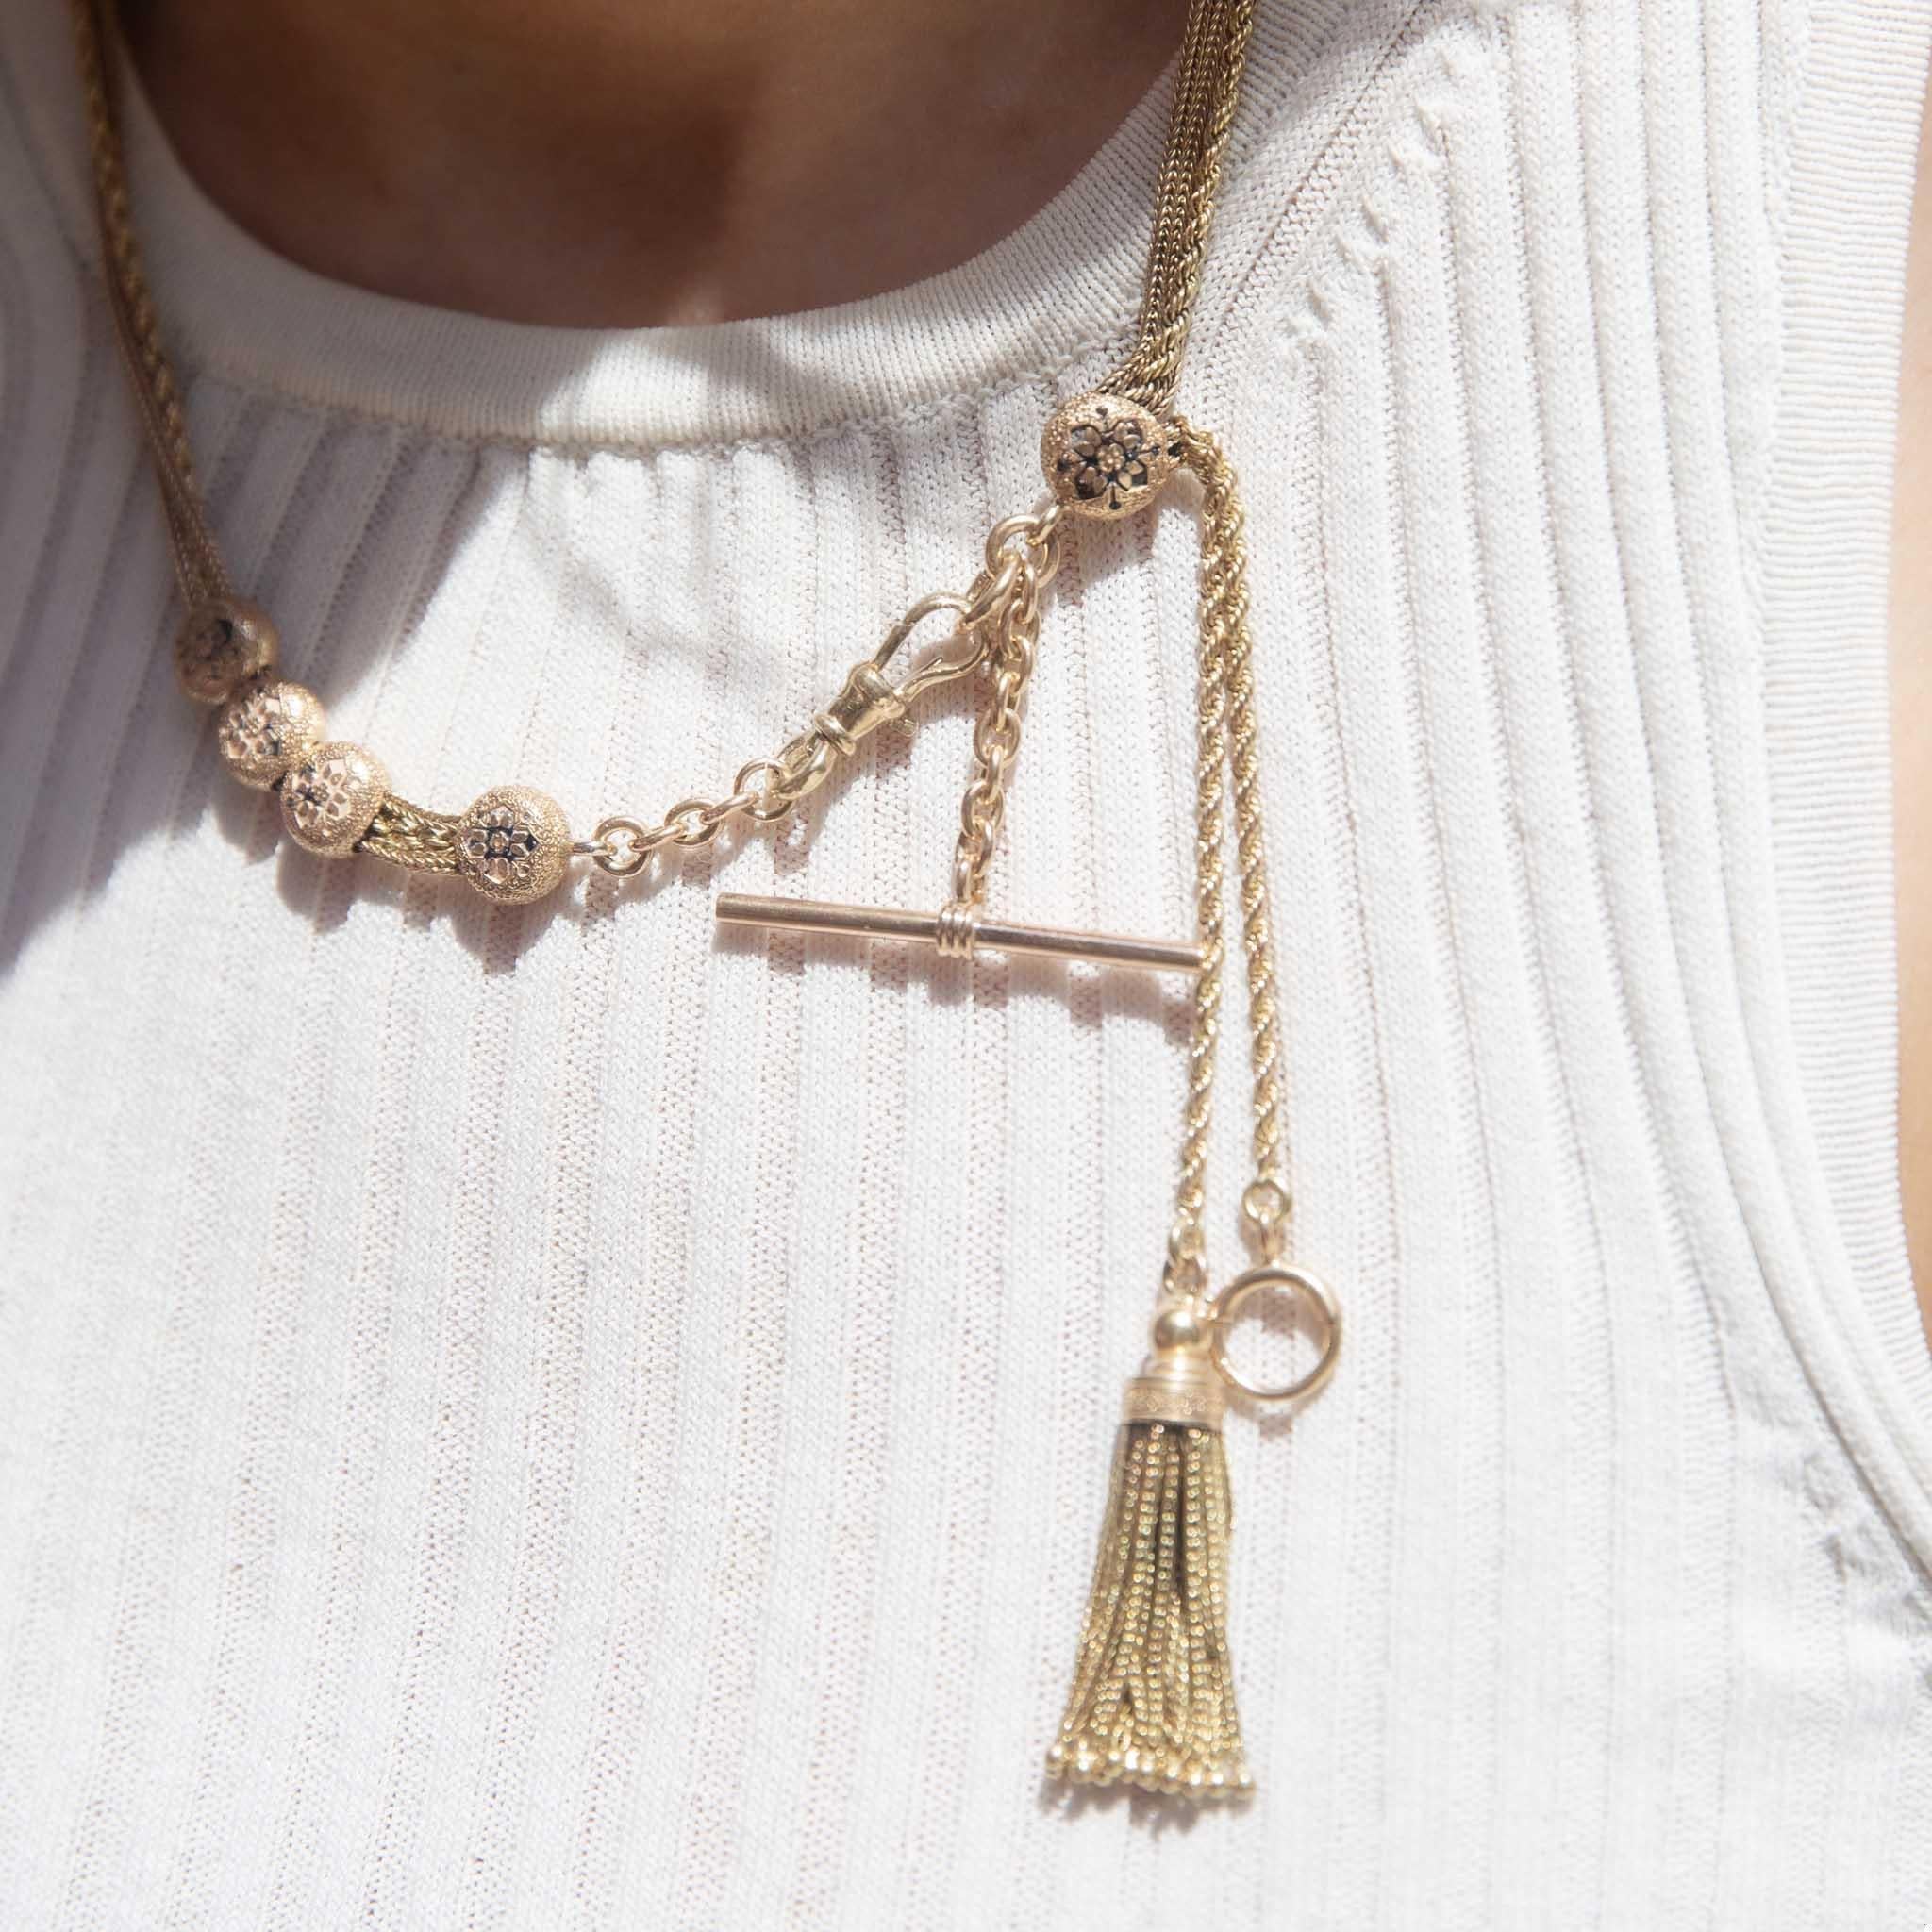 Lavishly crafted in 18, 15 & 9 carat gold, The Suelaidy Necklace is a bohemian delight. Her multi strand chains, tassel and tog offer up layer upon layer of curiousness. She is meant for one who is willing to lean in to their